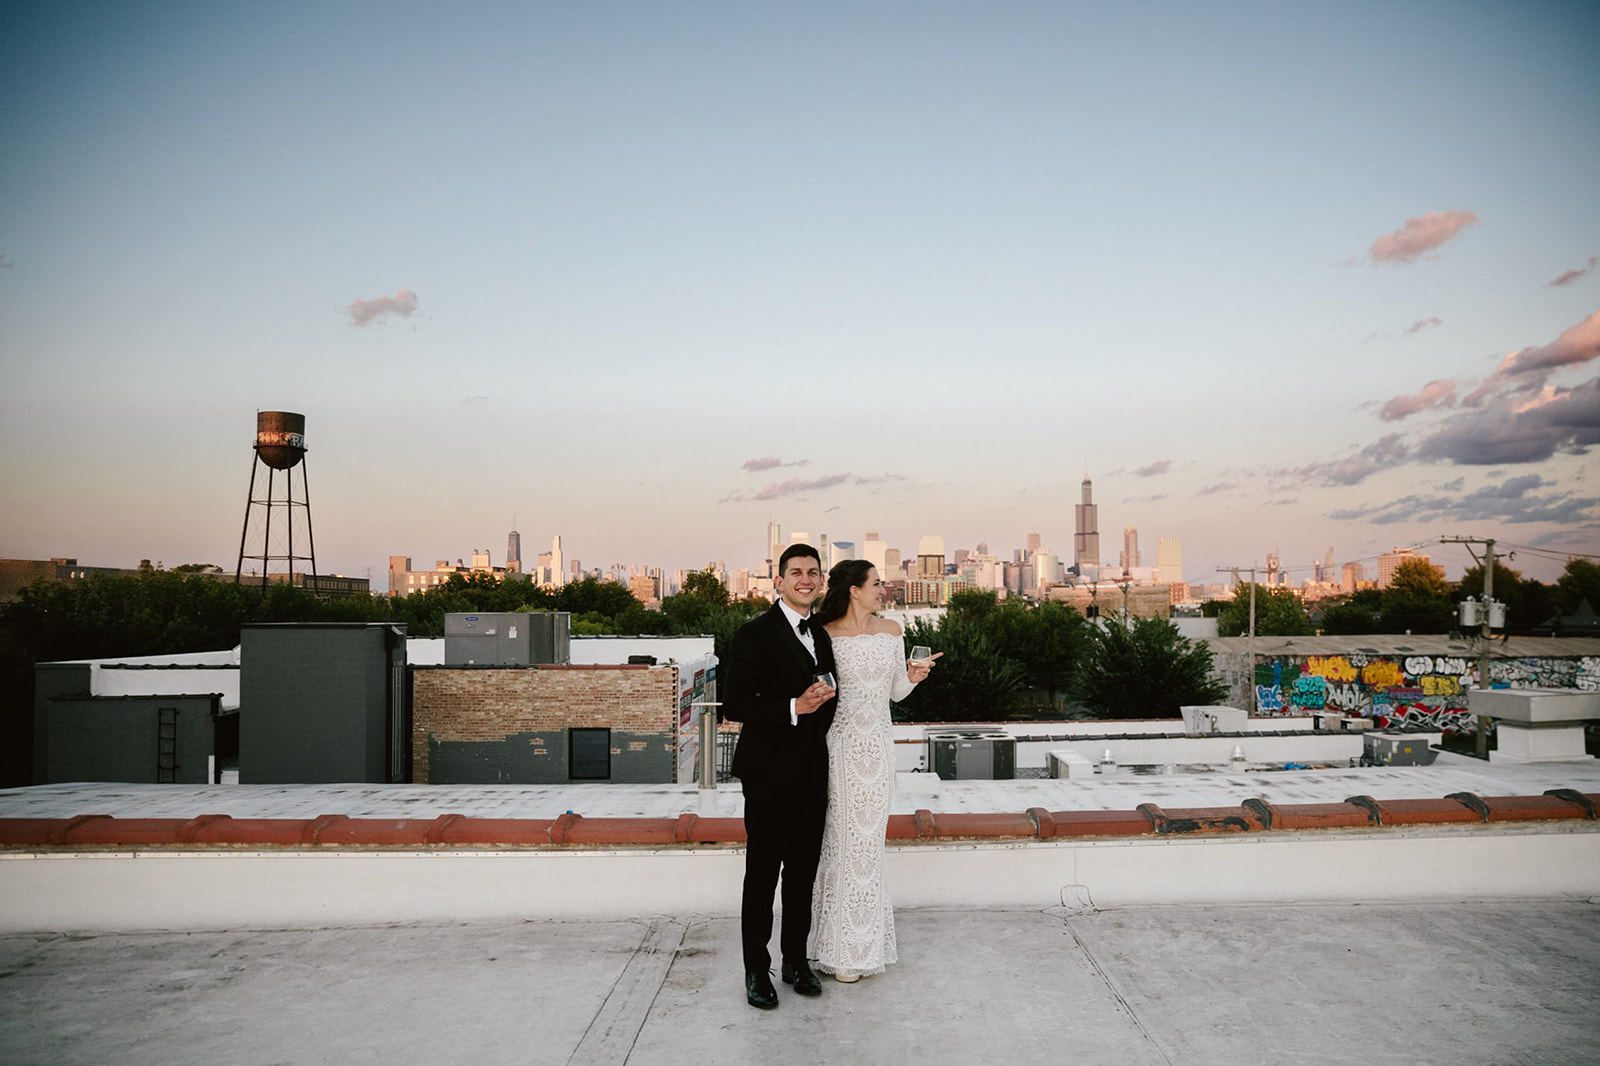 Sunset bliss: Newlyweds at Walden Chicago's rooftop, sharing a moment of pure love against the city skyline.